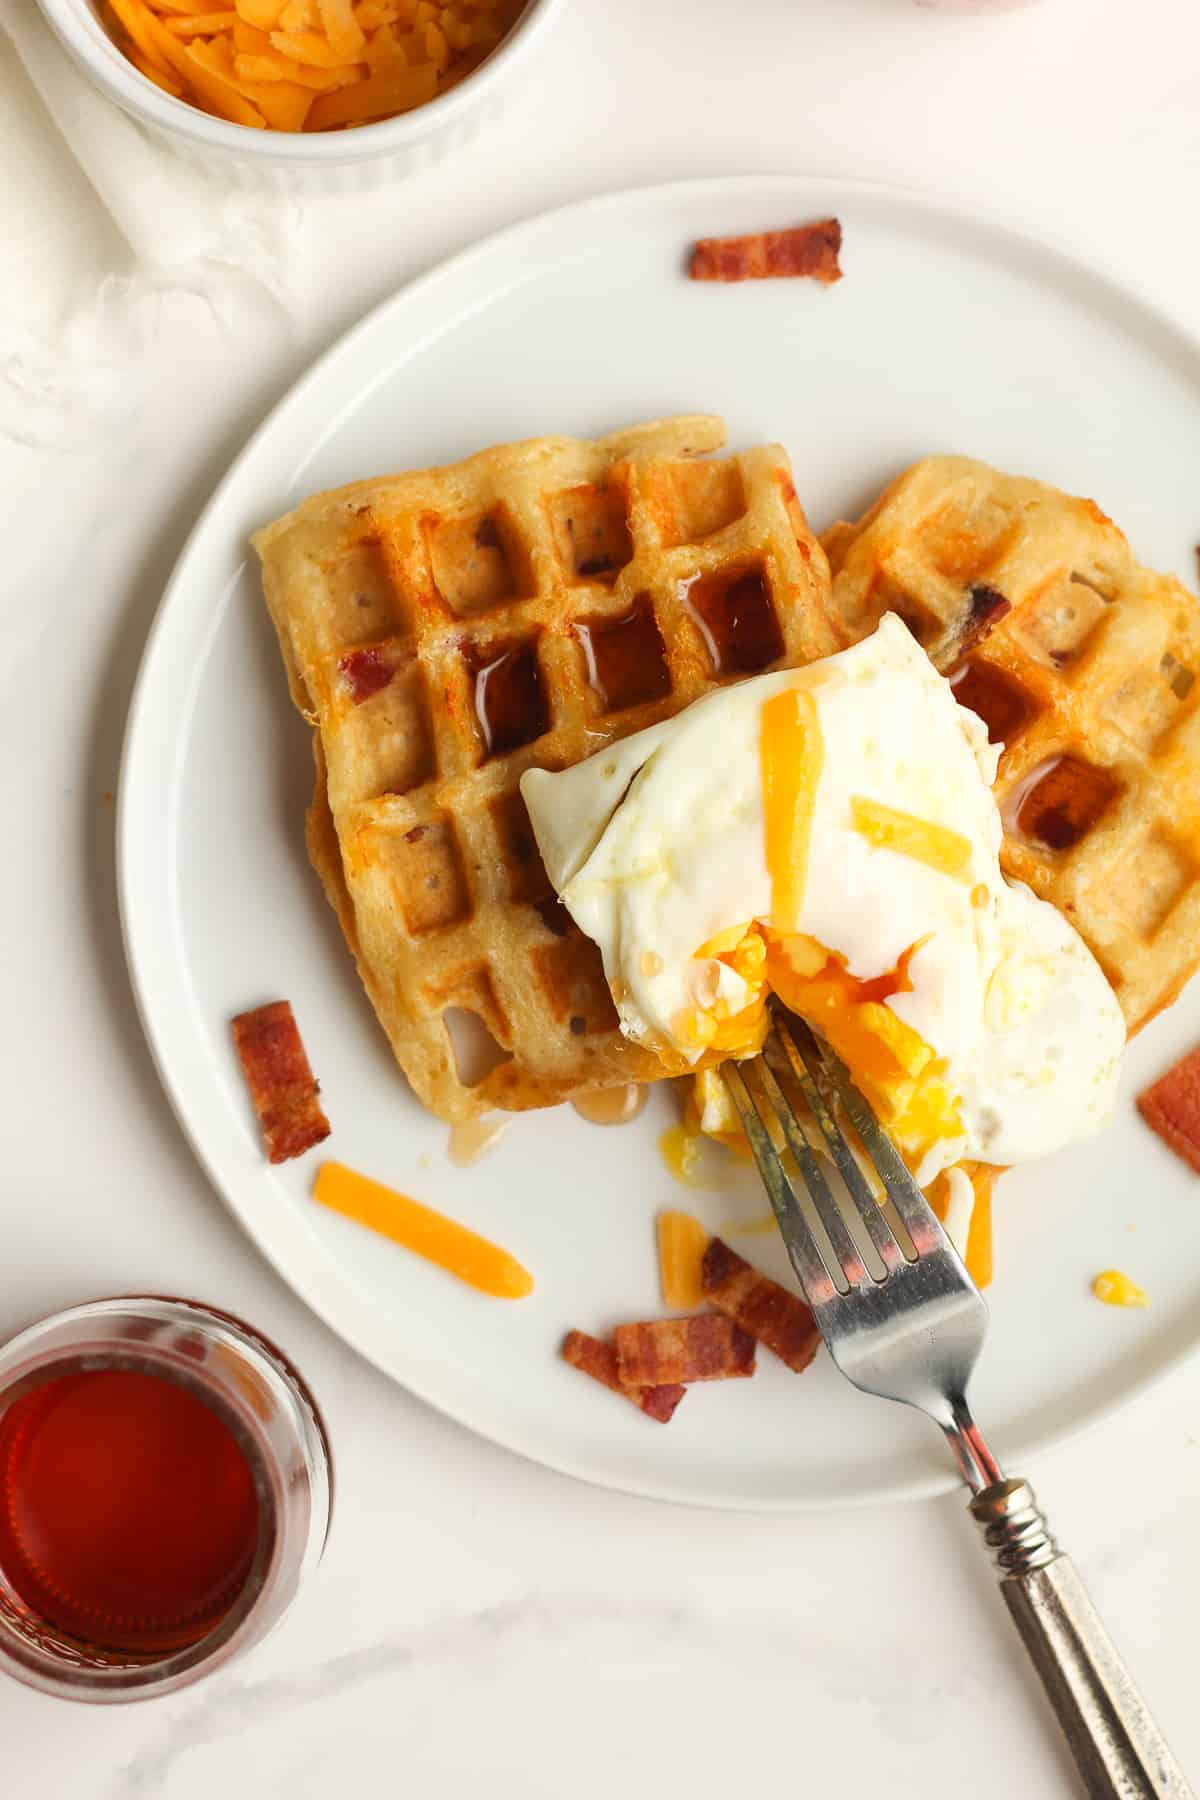 A plate of waffles with an egg on top.